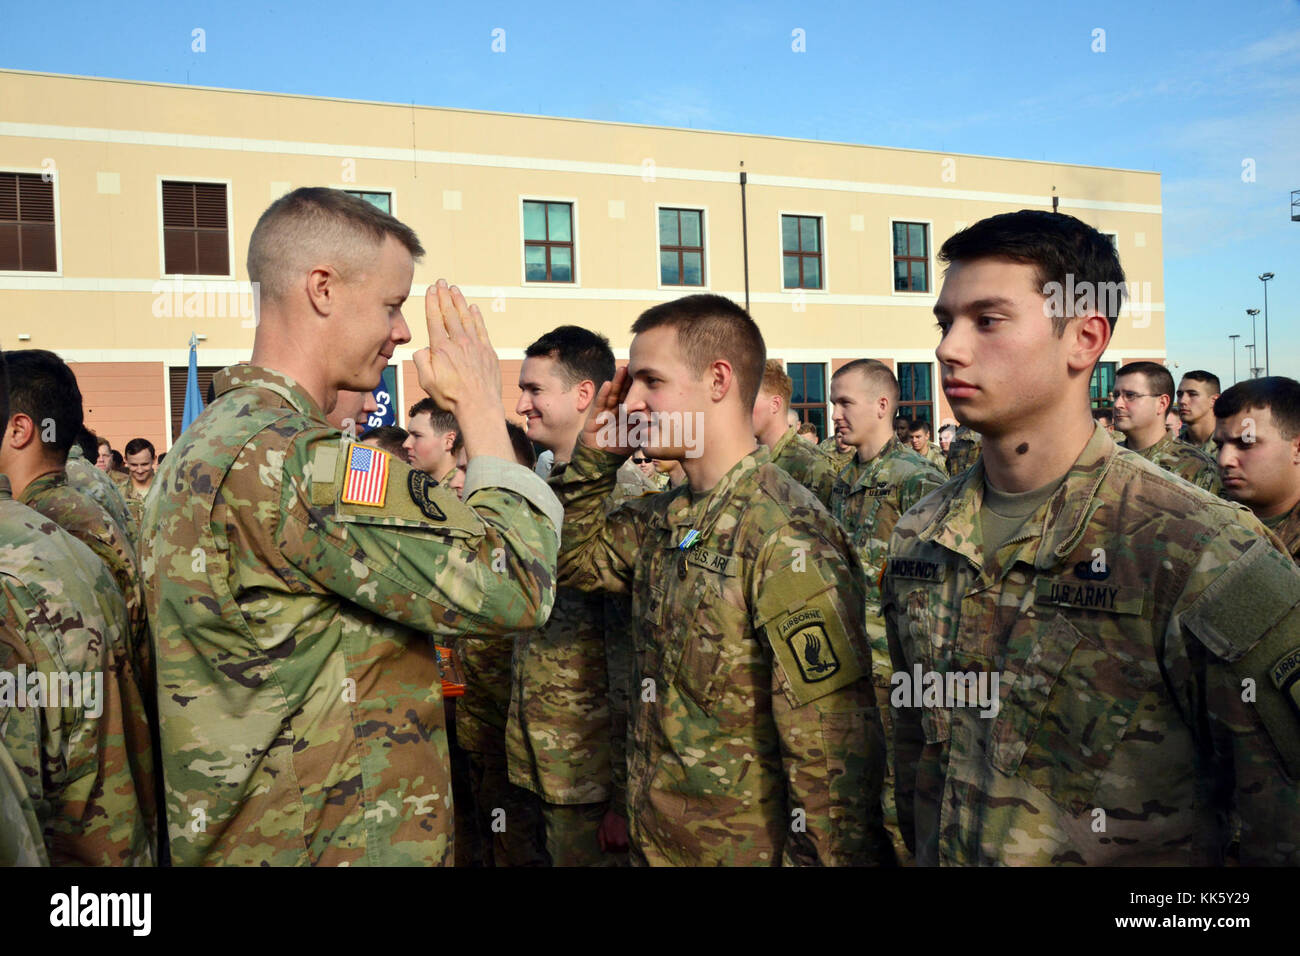 U.S. Army Paratroopers assigned to 2nd Battalion, 503rd Infantry Regiment, 173rd Airborne Brigade,  receive Rockvember Event participation medal for Brostrom Challenge, at Caserma Del Din, Vicenza, Italy, Nov. 8, 2017.   The 173rd Airborne Brigade is the U.S. Army Contingency Response Force in Europe, capable of projecting ready forces anywhere in the U.S. European, Africa or Central Commands areas of responsibility within 18 hours.   (U.S. Army photo by Massimo Bovo) Stock Photo